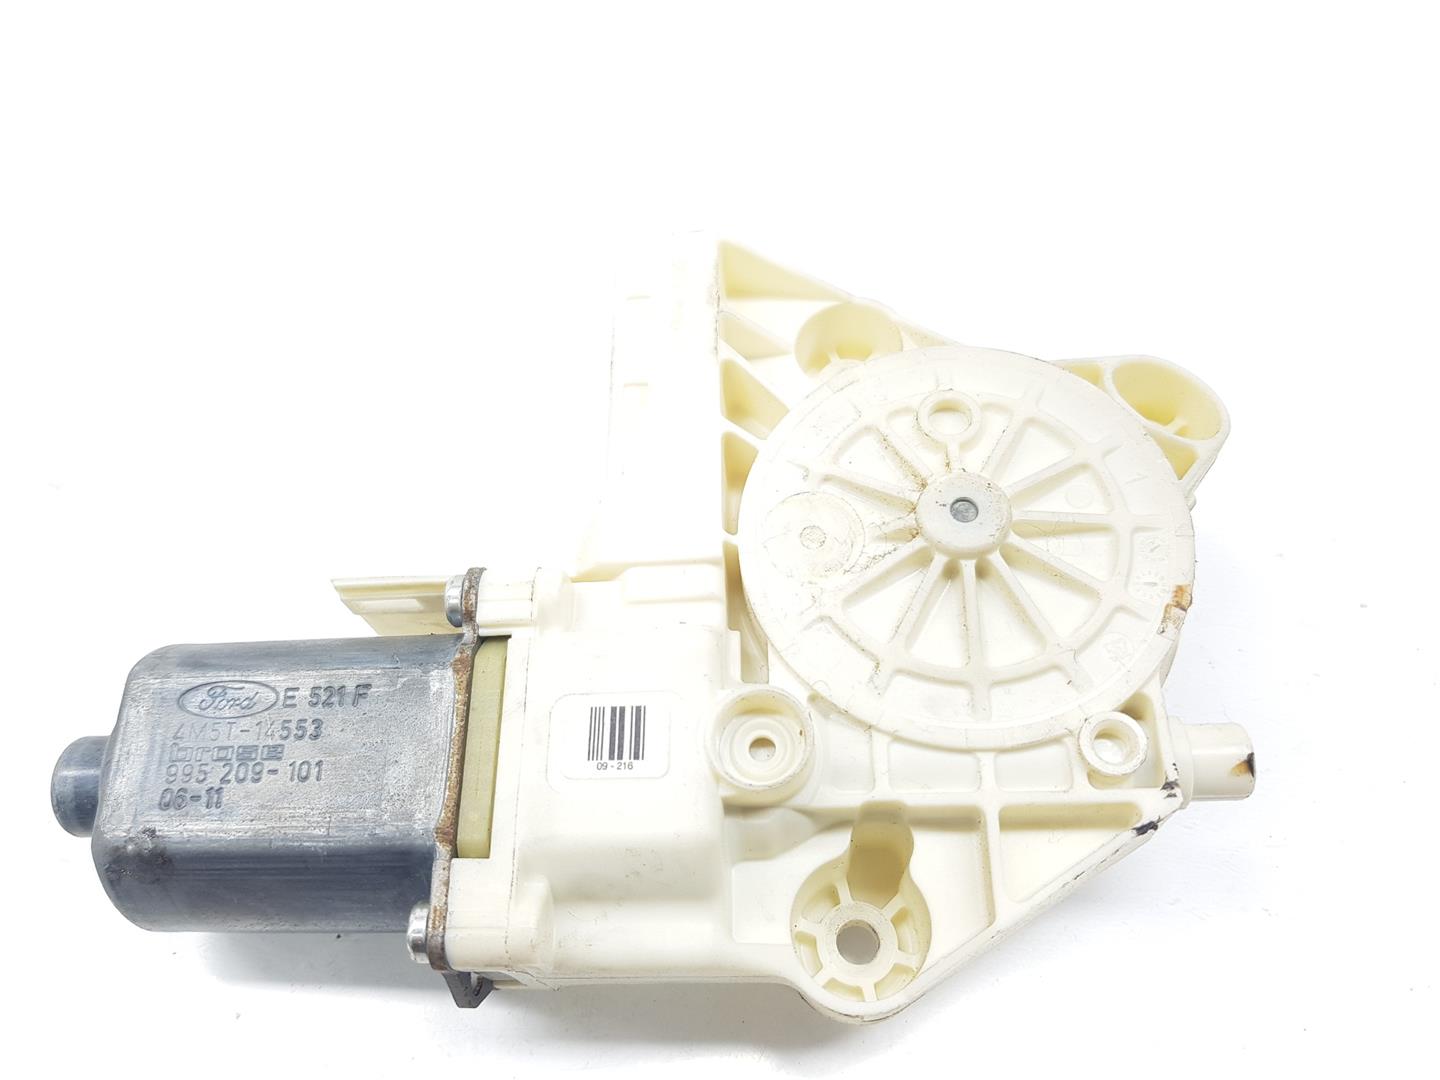 FORD Focus 2 generation (2004-2011) Front Right Door Window Control Motor 1347884, AM5T14553 21432295